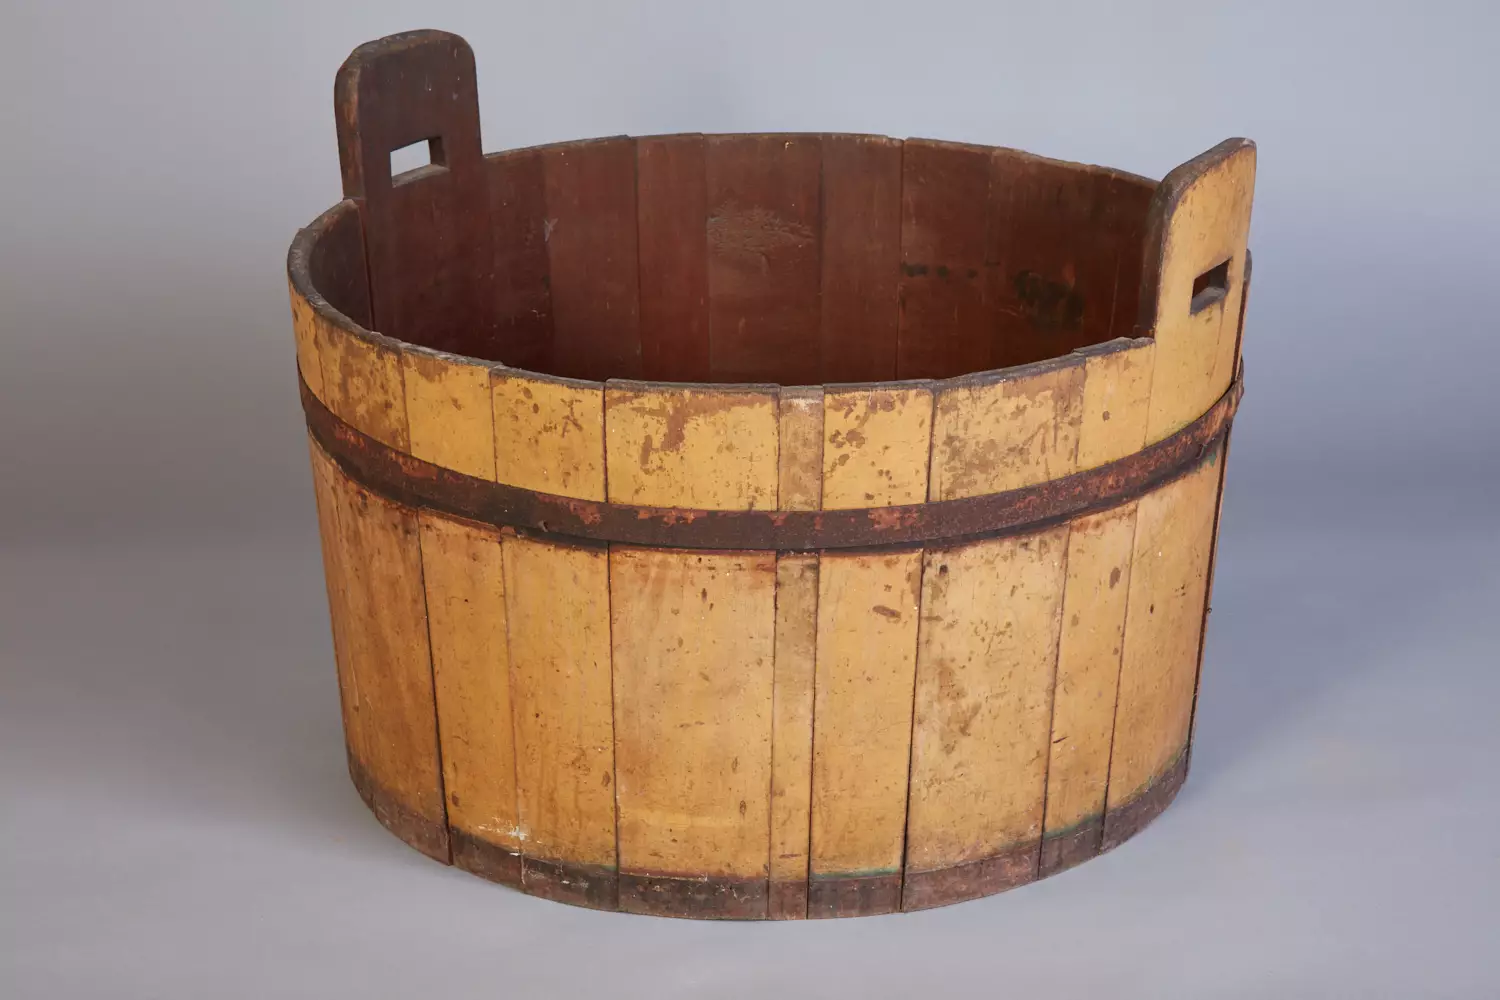 An old wooden bucket with handles on it.